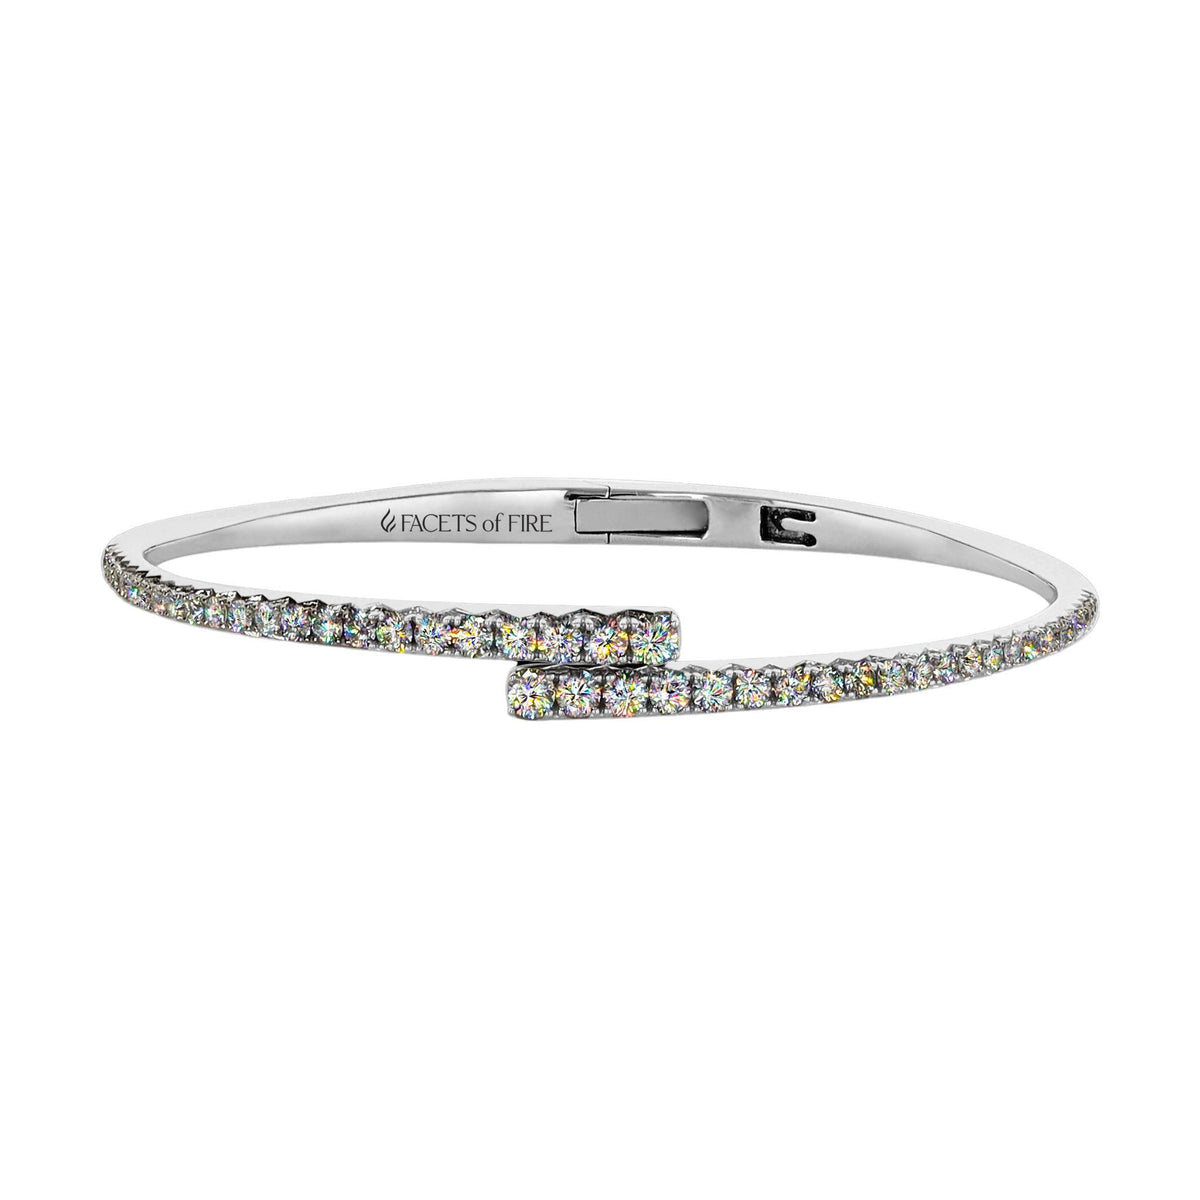 Facets Of Fire 14K White Gold Bangle Bracelet With 2.01cttw Natural Diamonds